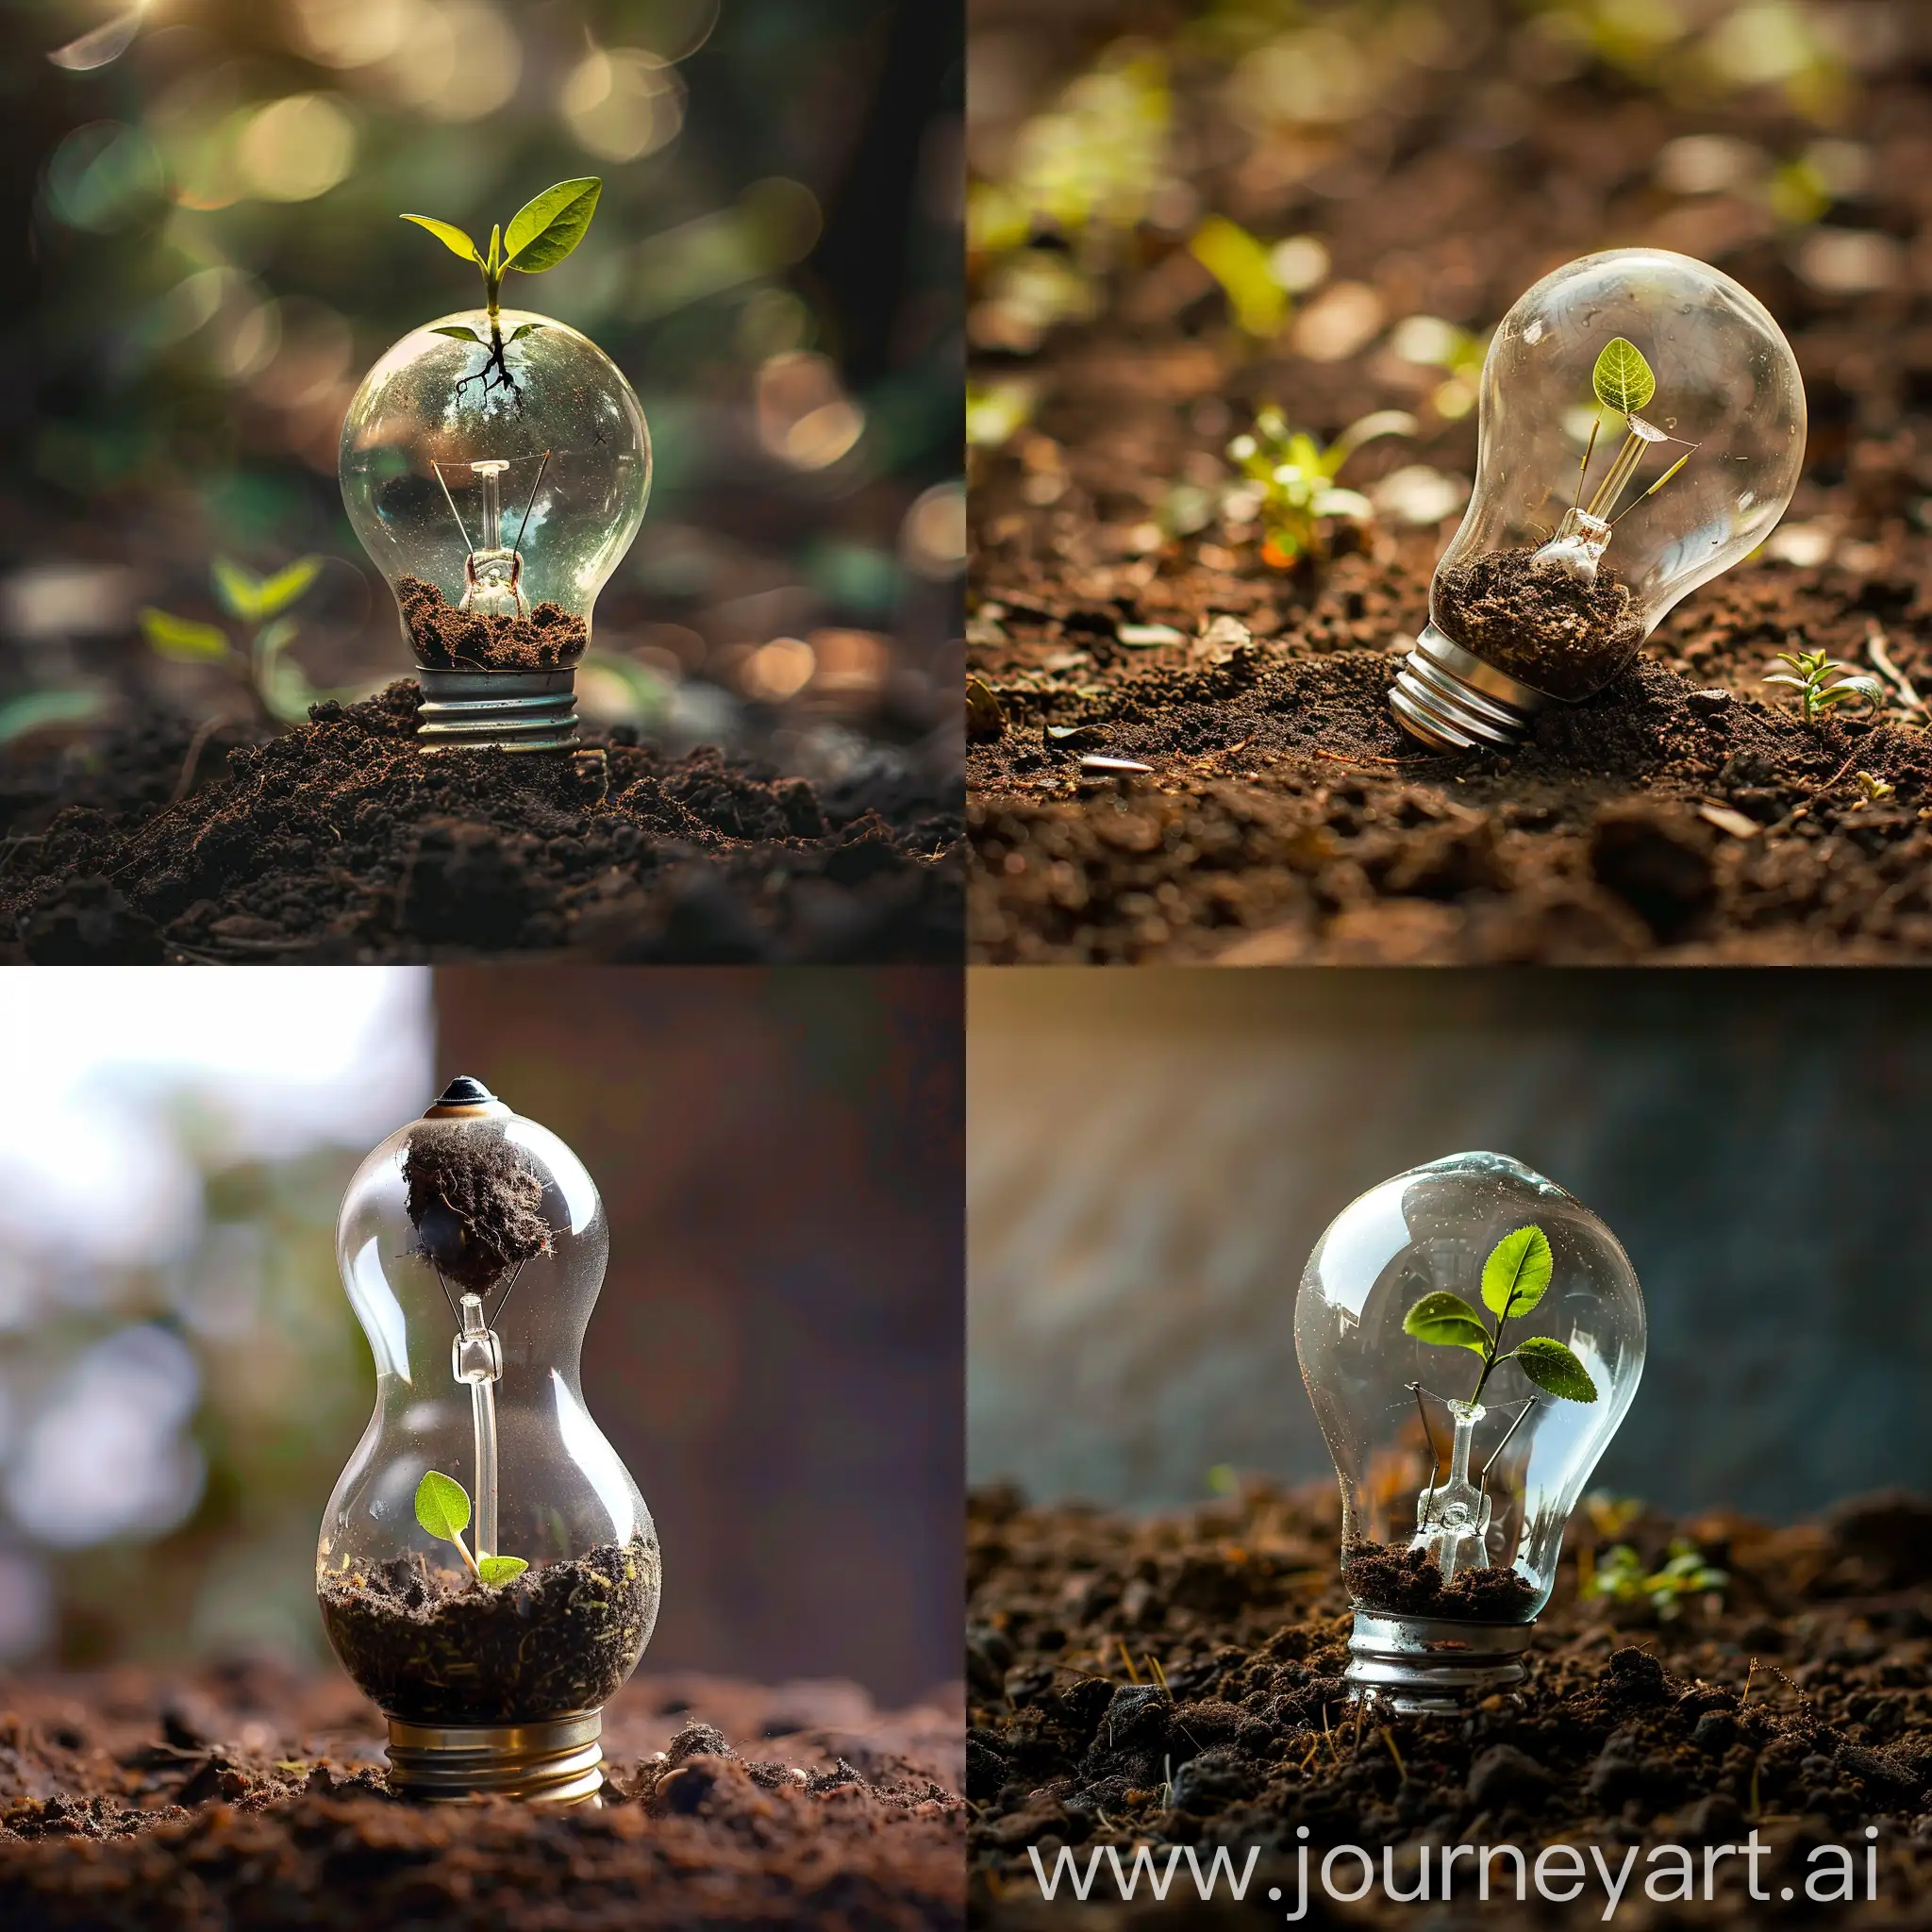 a bulb that has been kept on soil, showing soil inside and a small plant growing out of that soil inside the bulb. the whole picture signifying green energy